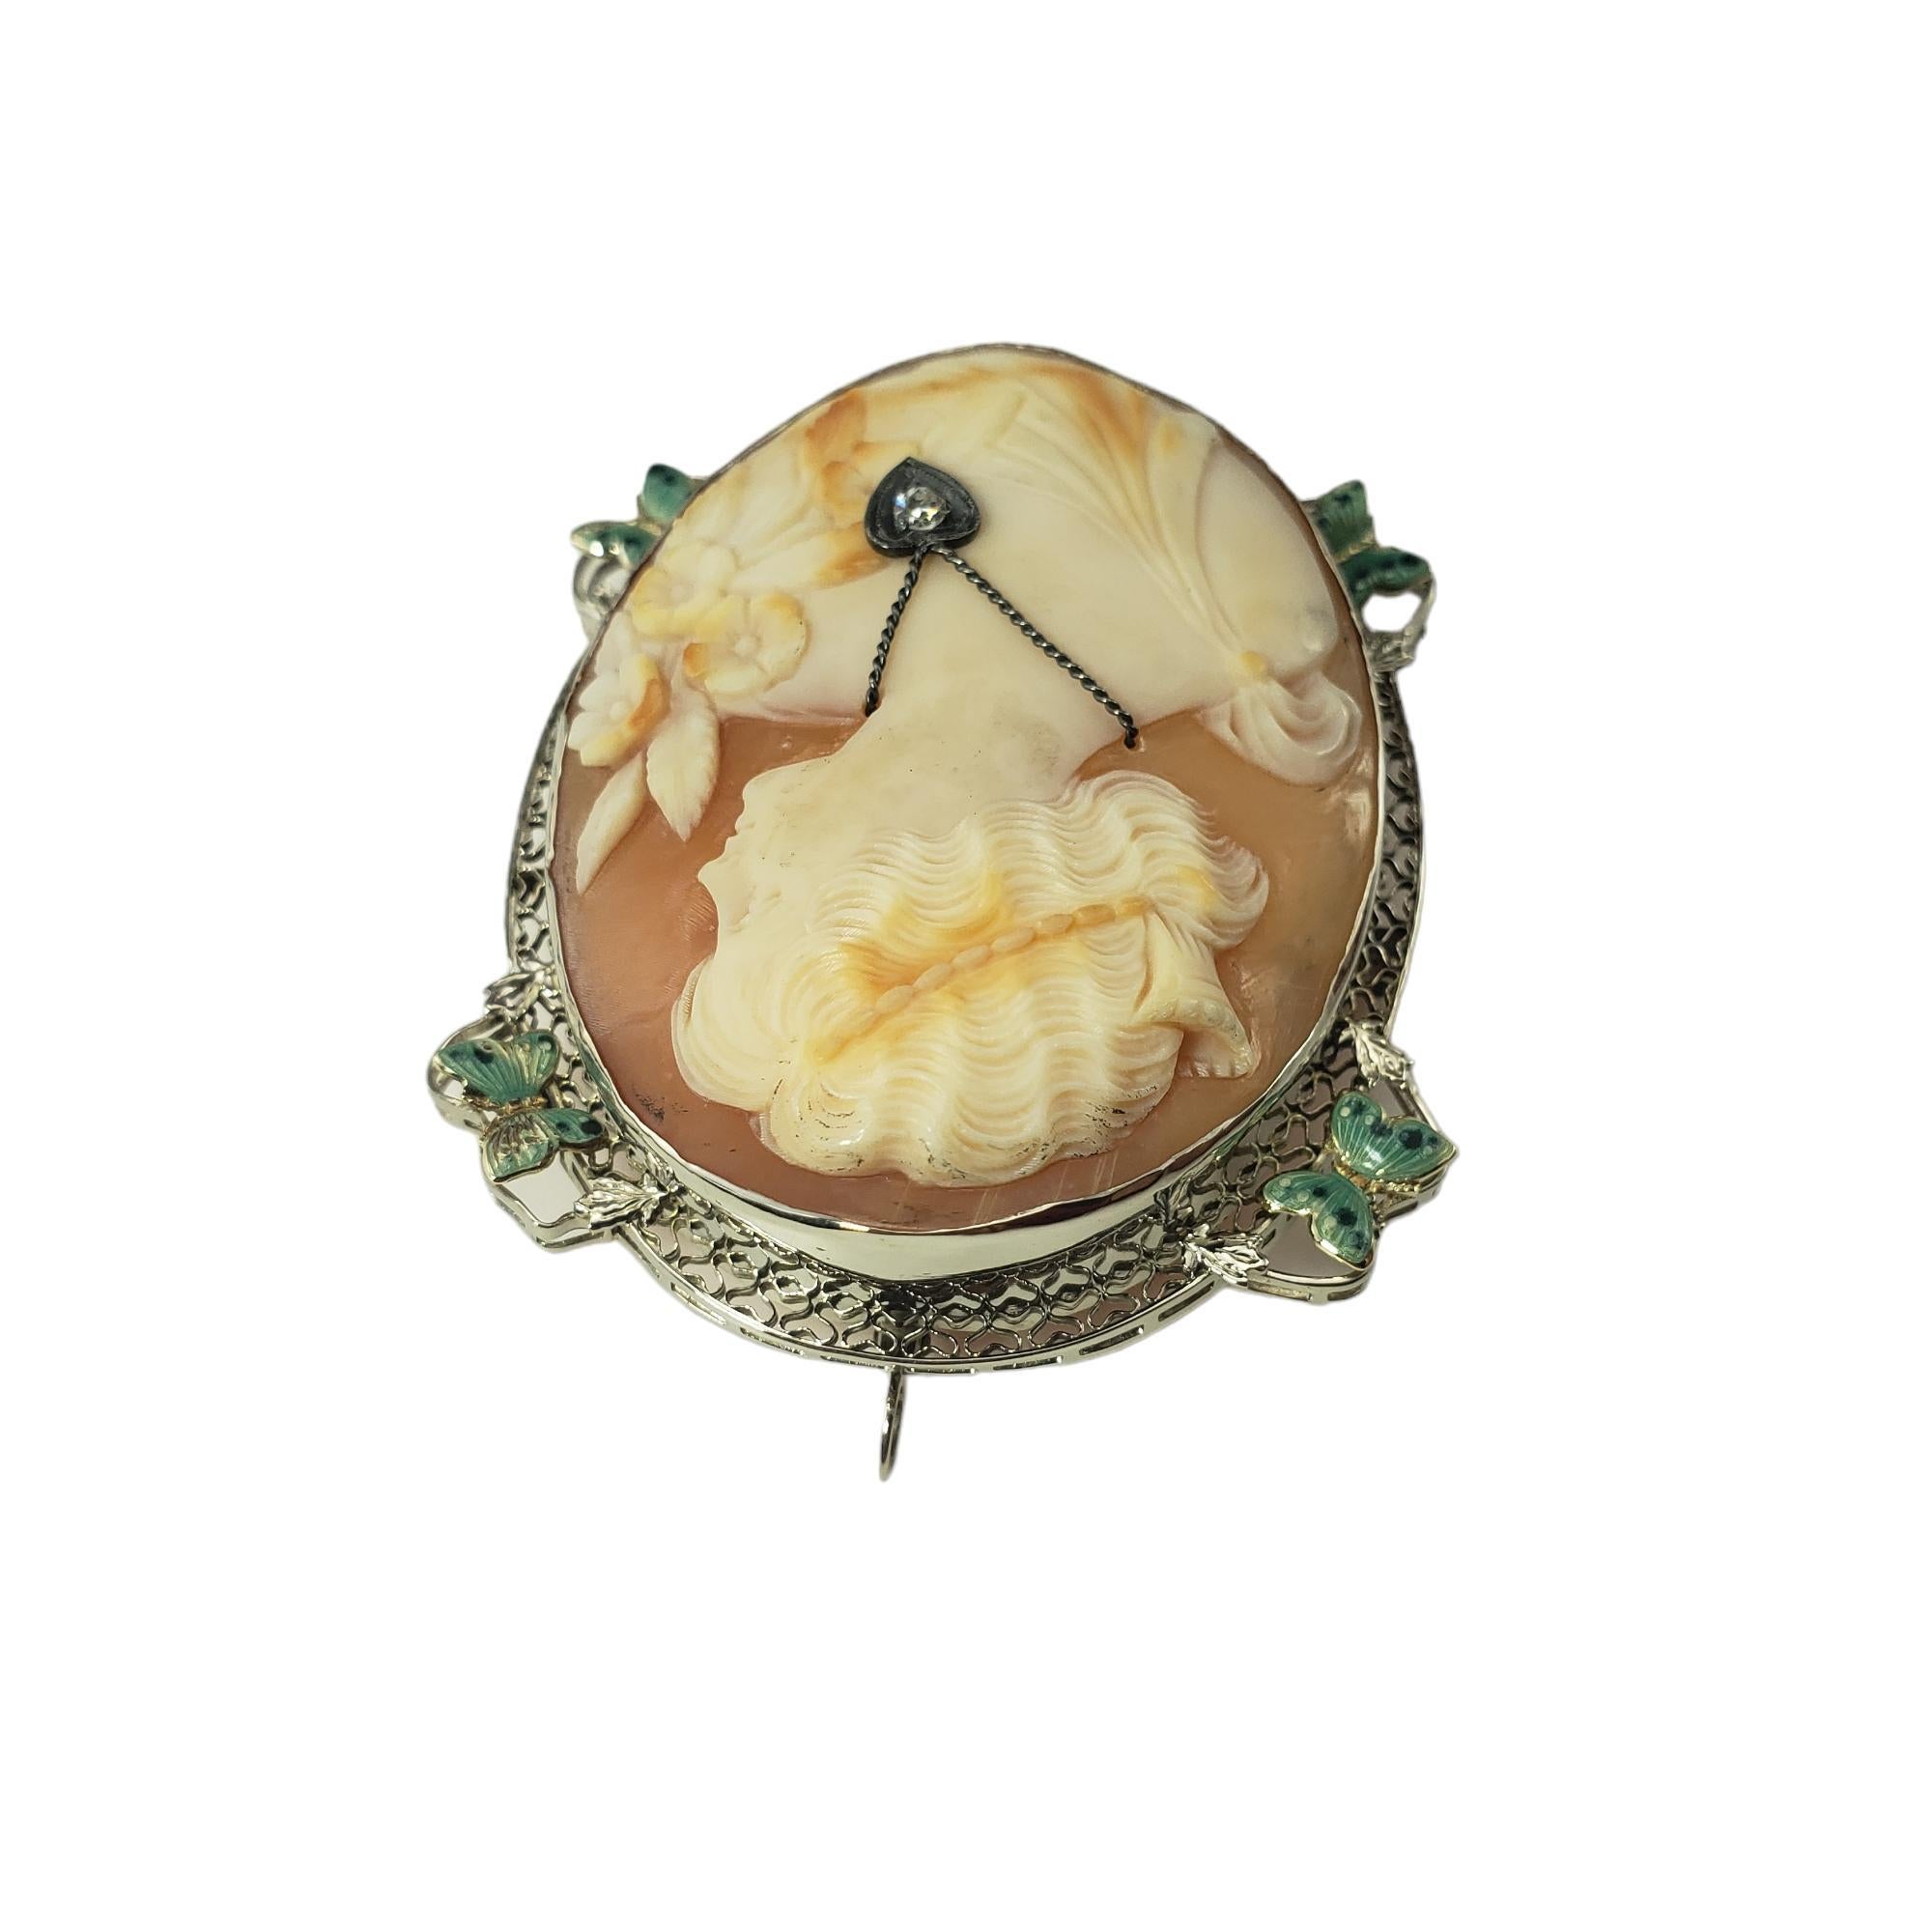 14 Karat White Gold and Diamond Cameo Brooch/Pendant #15700 In Good Condition For Sale In Washington Depot, CT